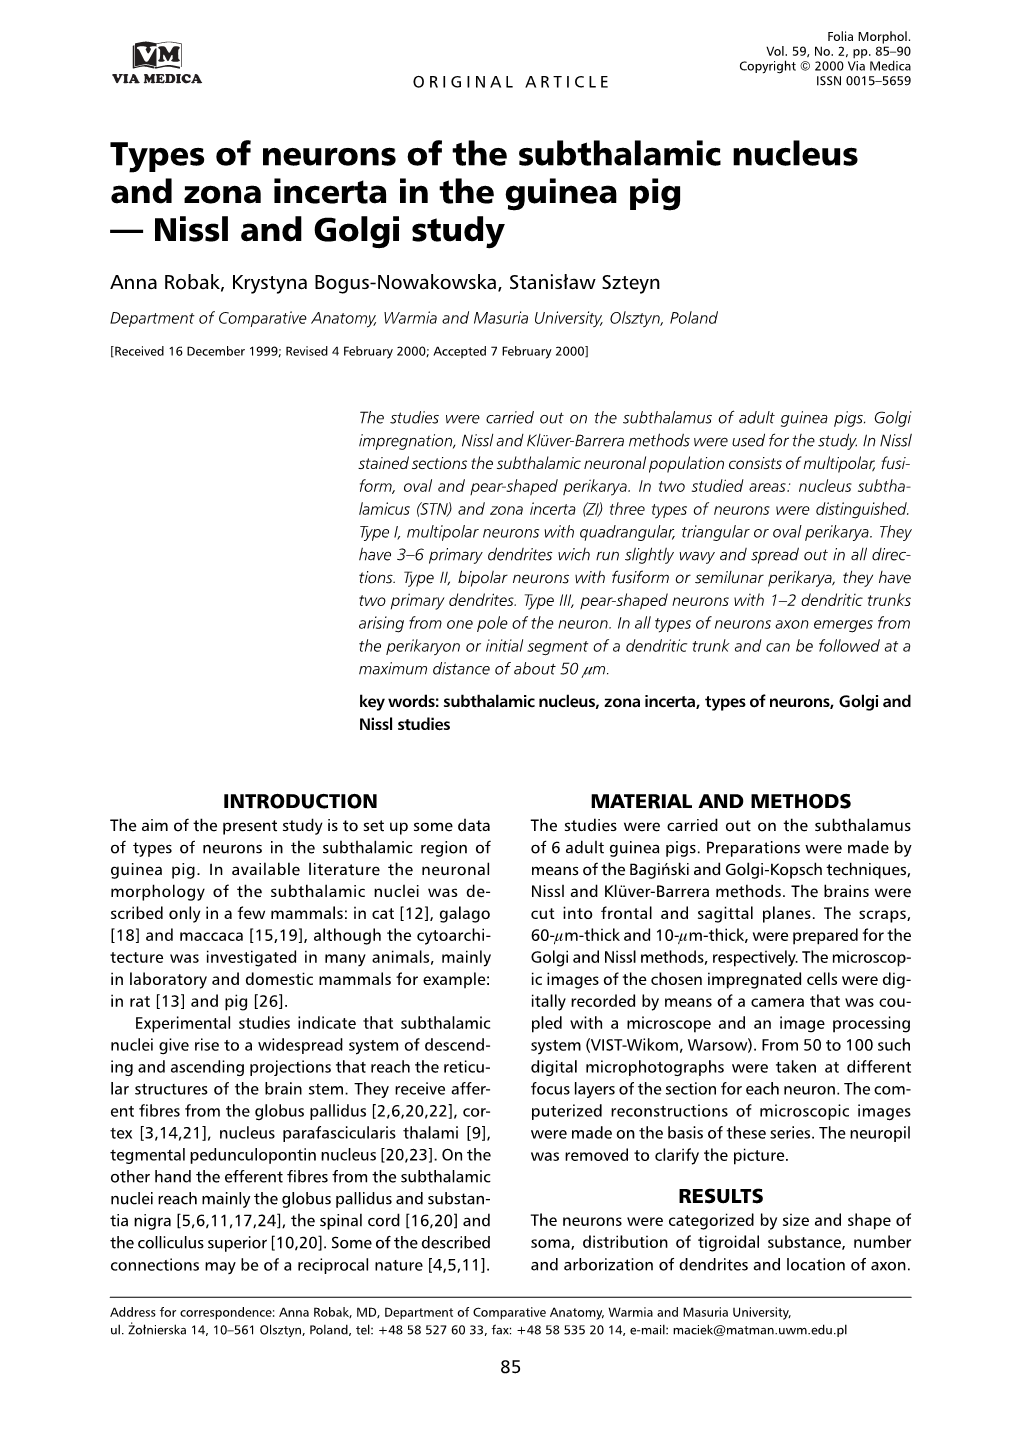 Types of Neurons of the Subthalamic Nucleus and Zona Incerta in the Guinea Pig — Nissl and Golgi Study